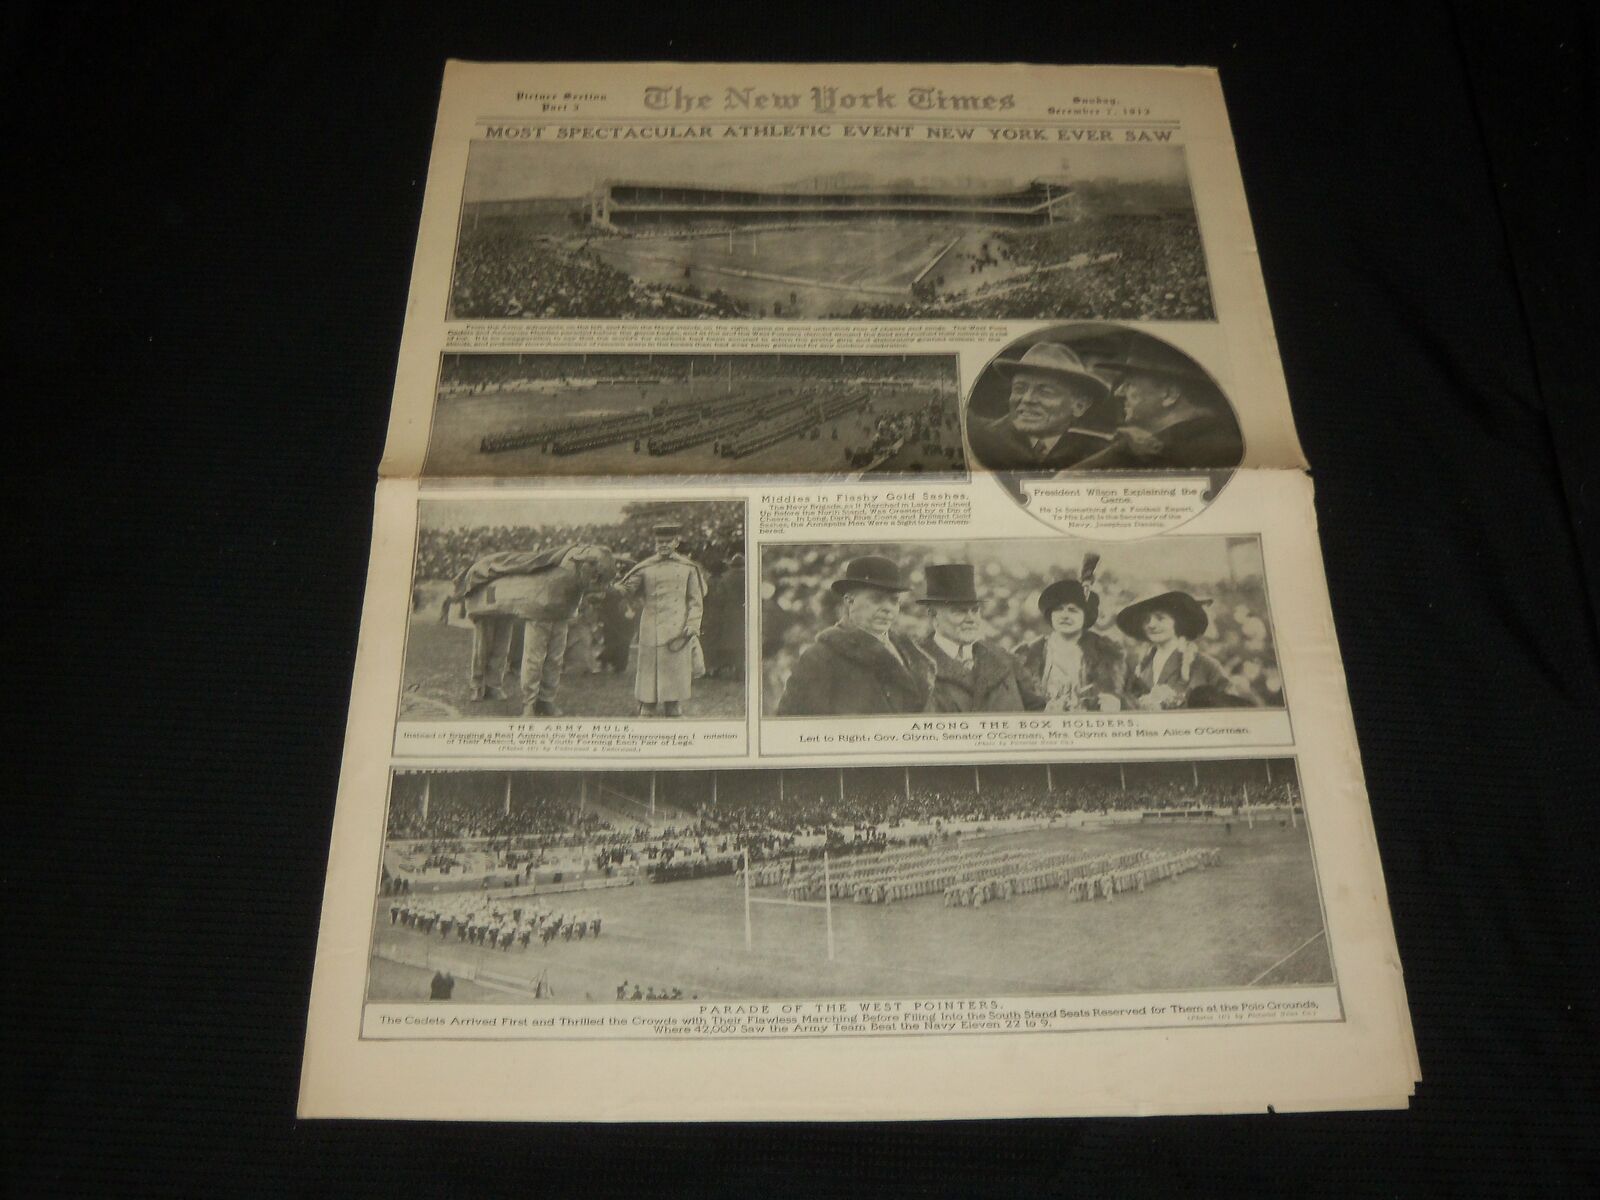 1913 DECEMBER 7 NEW YORK TIMES PICTURE SECTION - ARMY & NAVY GAME - NP 5615